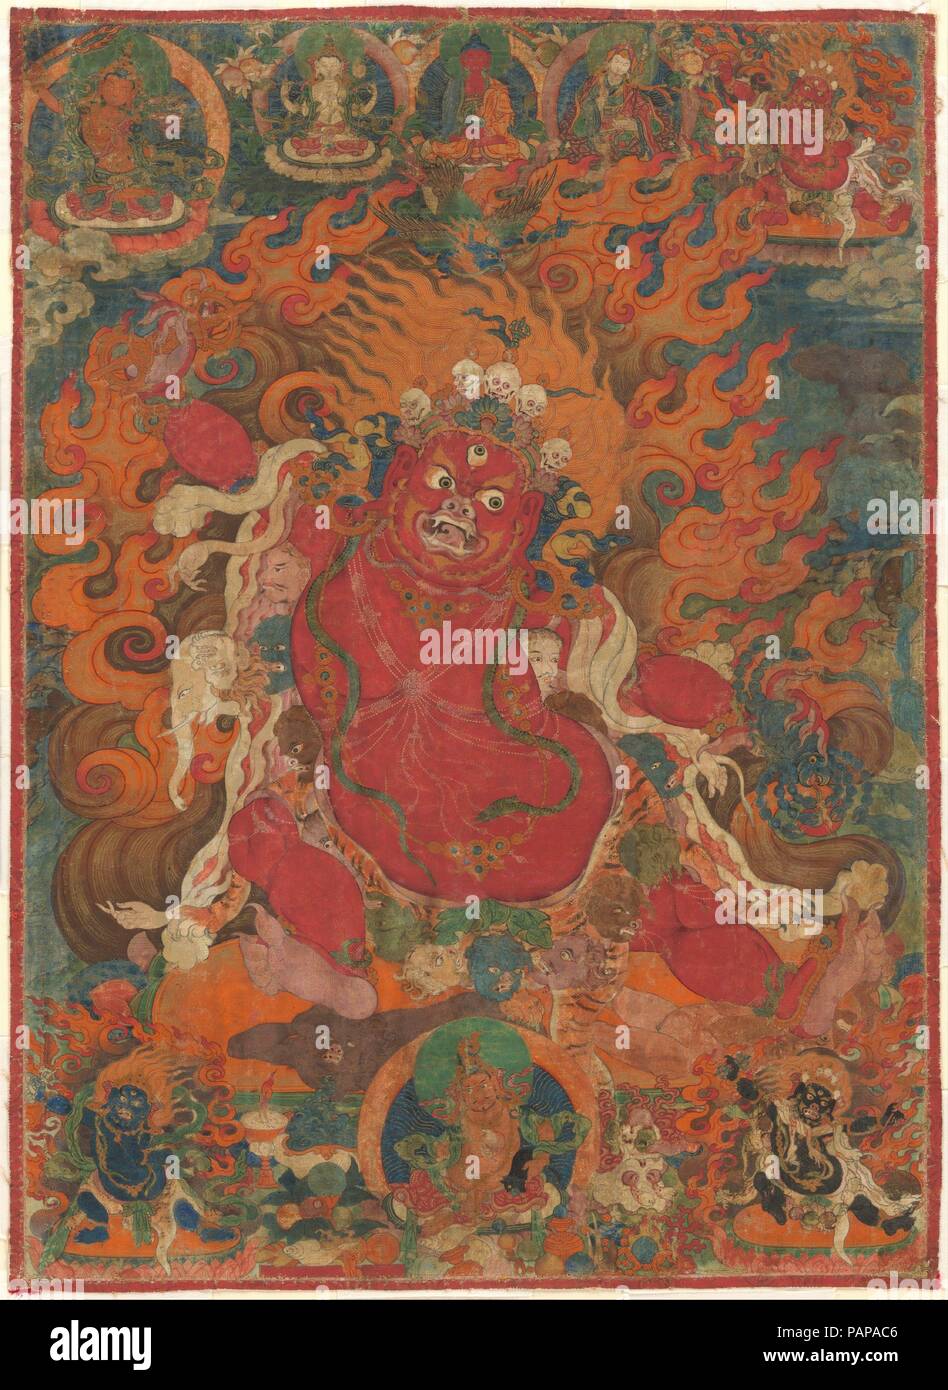 Guru Dragpo. Culture: Tibet. Dimensions: Image: 24 in. × 17 1/2 in. (61 × 44.5 cm)  Framed: 33 1/16 × 25 13/16 in. (84 × 65.5 cm). Date: 18th century.  Guru Dragpo, a fierce emanation of the guru-saint Padmasambhava, stands astride a flaming aureole holding a ritual tool, the vajra, and a black scorpion. The skin of a tiger is drawn around his waist while the flayed skin of an elephant is draped over his shoulders. He wears a crown adorned with skulls and a garland of severed heads. In this wrathful meditational form, Guru Dragpo was an important protector deity of the Nyingma School of Tibeta Stock Photo